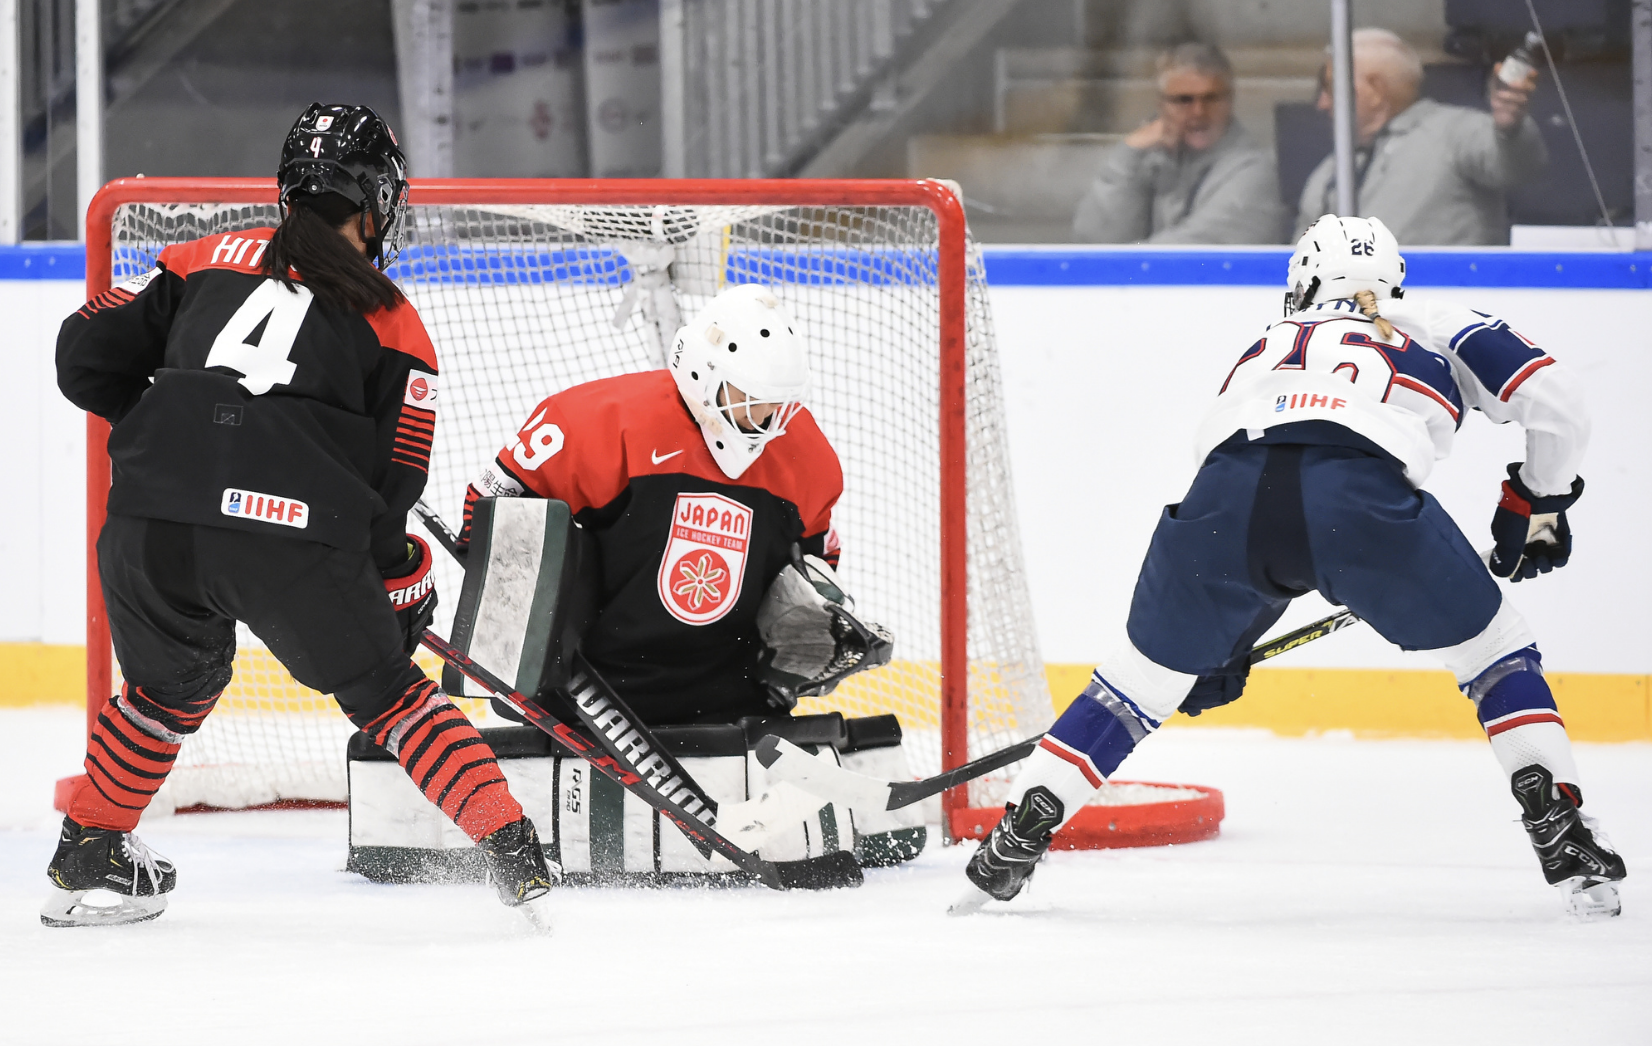 Coyne Schofield is just off the left corner of the net shooting on Masuhara, who is in the butterfly. Ayaka Hitosato defends out front. Coyne Schofield is in white, while the Japanese players are in black and red.